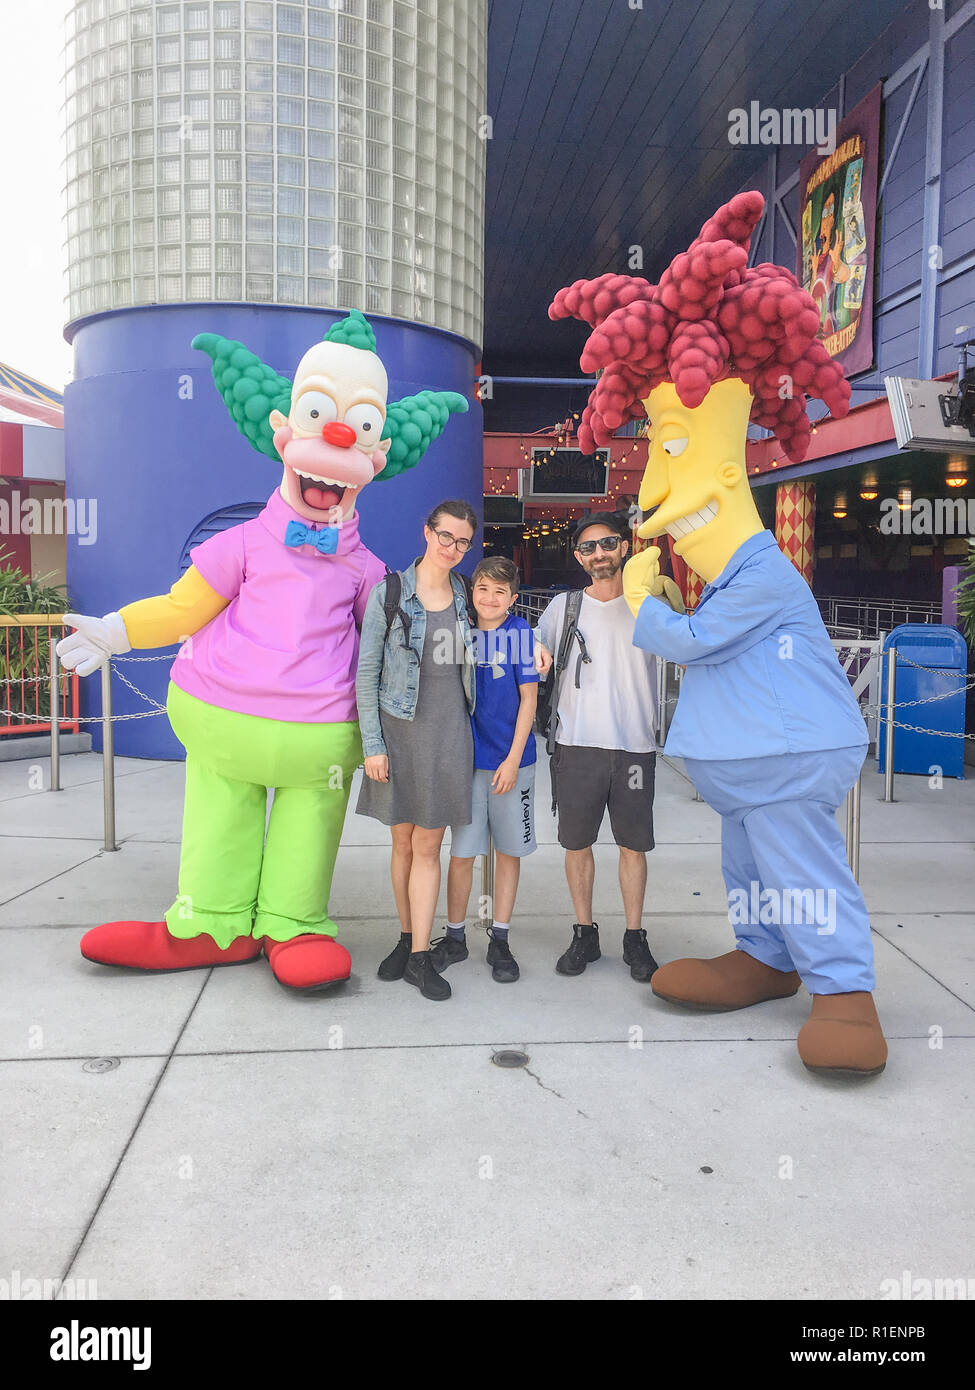 APRIL 25, 2018 - ORLANDO, FLORIDA: FAMILY POSES WITH SIMPSON CHARACTERS AT UNIVERSAL STUDIOS. Stock Photo